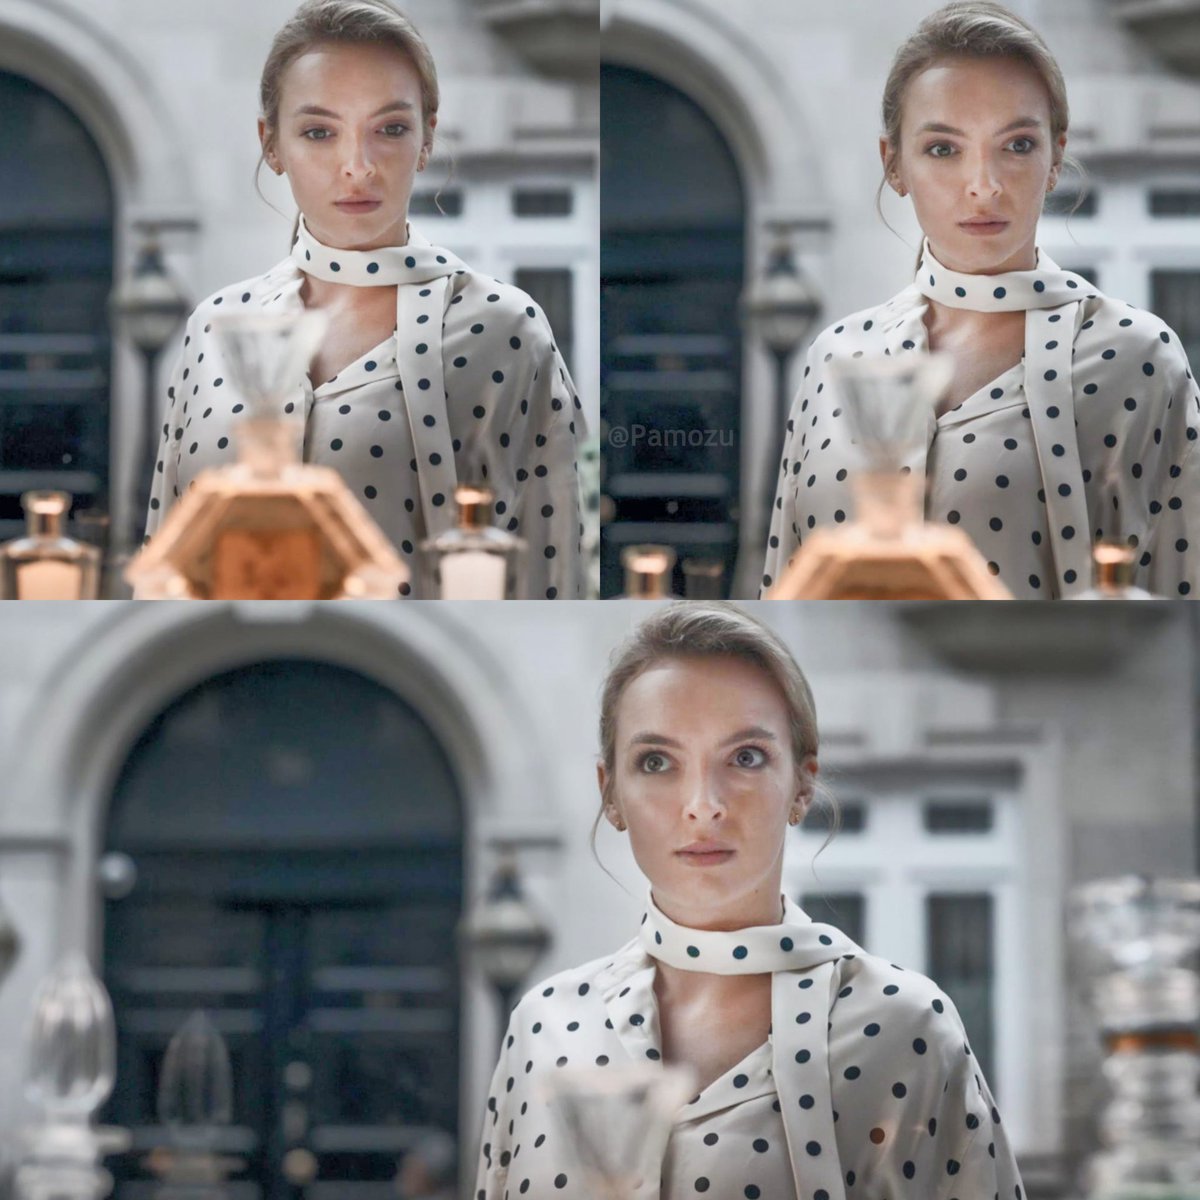 and end this thread with this elegant blouse  #KillingEve    #Villaneve